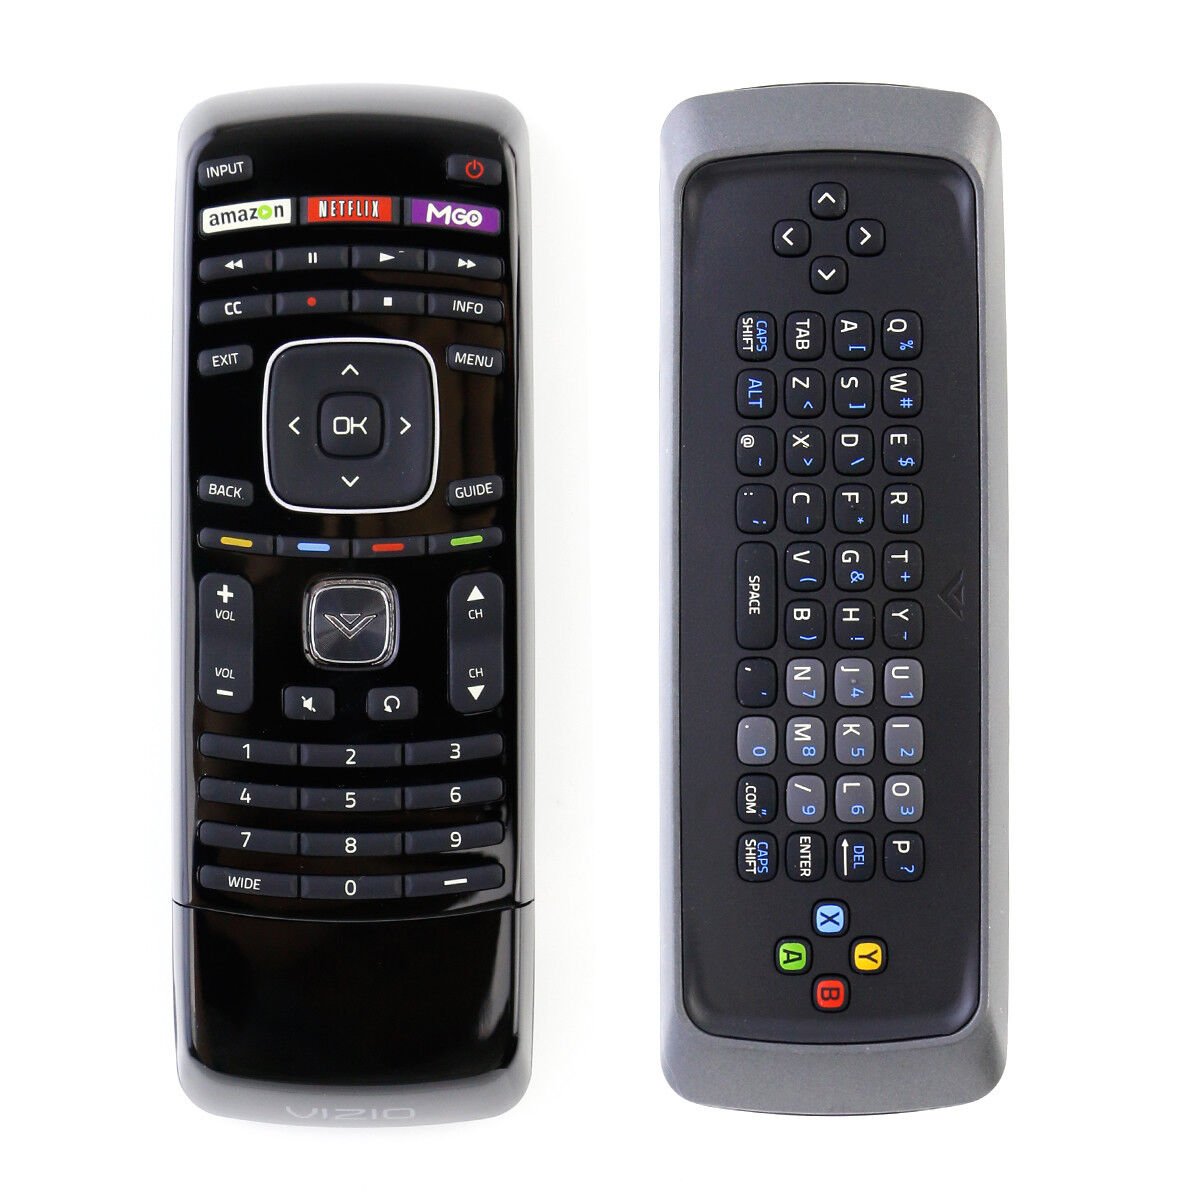 XRT302 for VIZIO Smart TV Remote with Qwerty Dual Side Keyboard E460ME M420SR